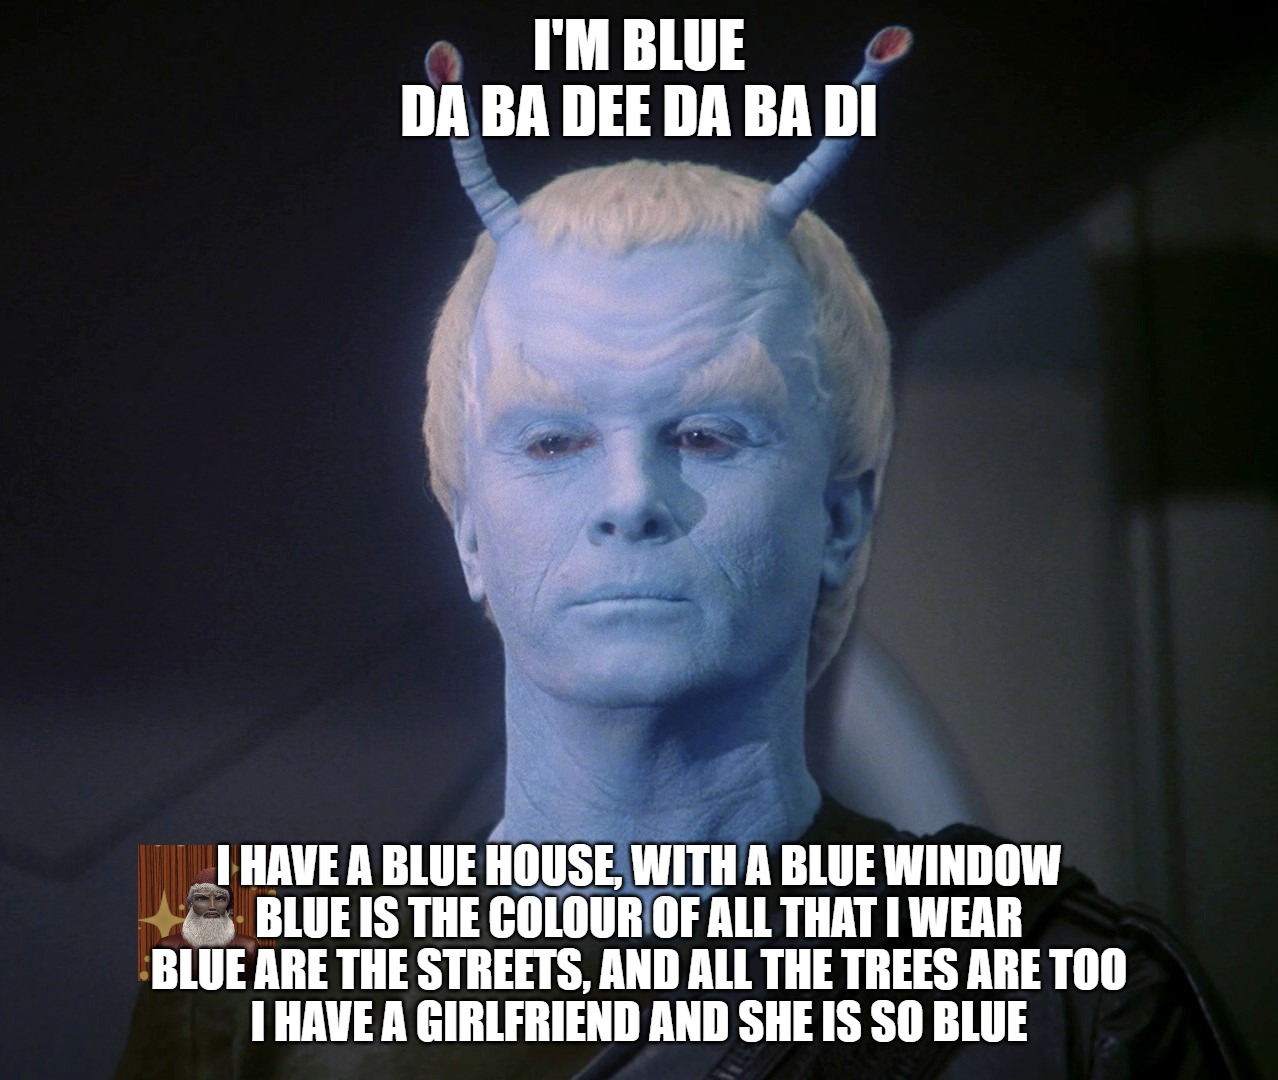 Blue (Da Ba De) Star Trek Music Meme | I'M BLUE
DA BA DEE DA BA DI; I HAVE A BLUE HOUSE, WITH A BLUE WINDOW
BLUE IS THE COLOUR OF ALL THAT I WEAR
BLUE ARE THE STREETS, AND ALL THE TREES ARE TOO
I HAVE A GIRLFRIEND AND SHE IS SO BLUE | image tagged in star trek,music,memes,meme | made w/ Imgflip meme maker